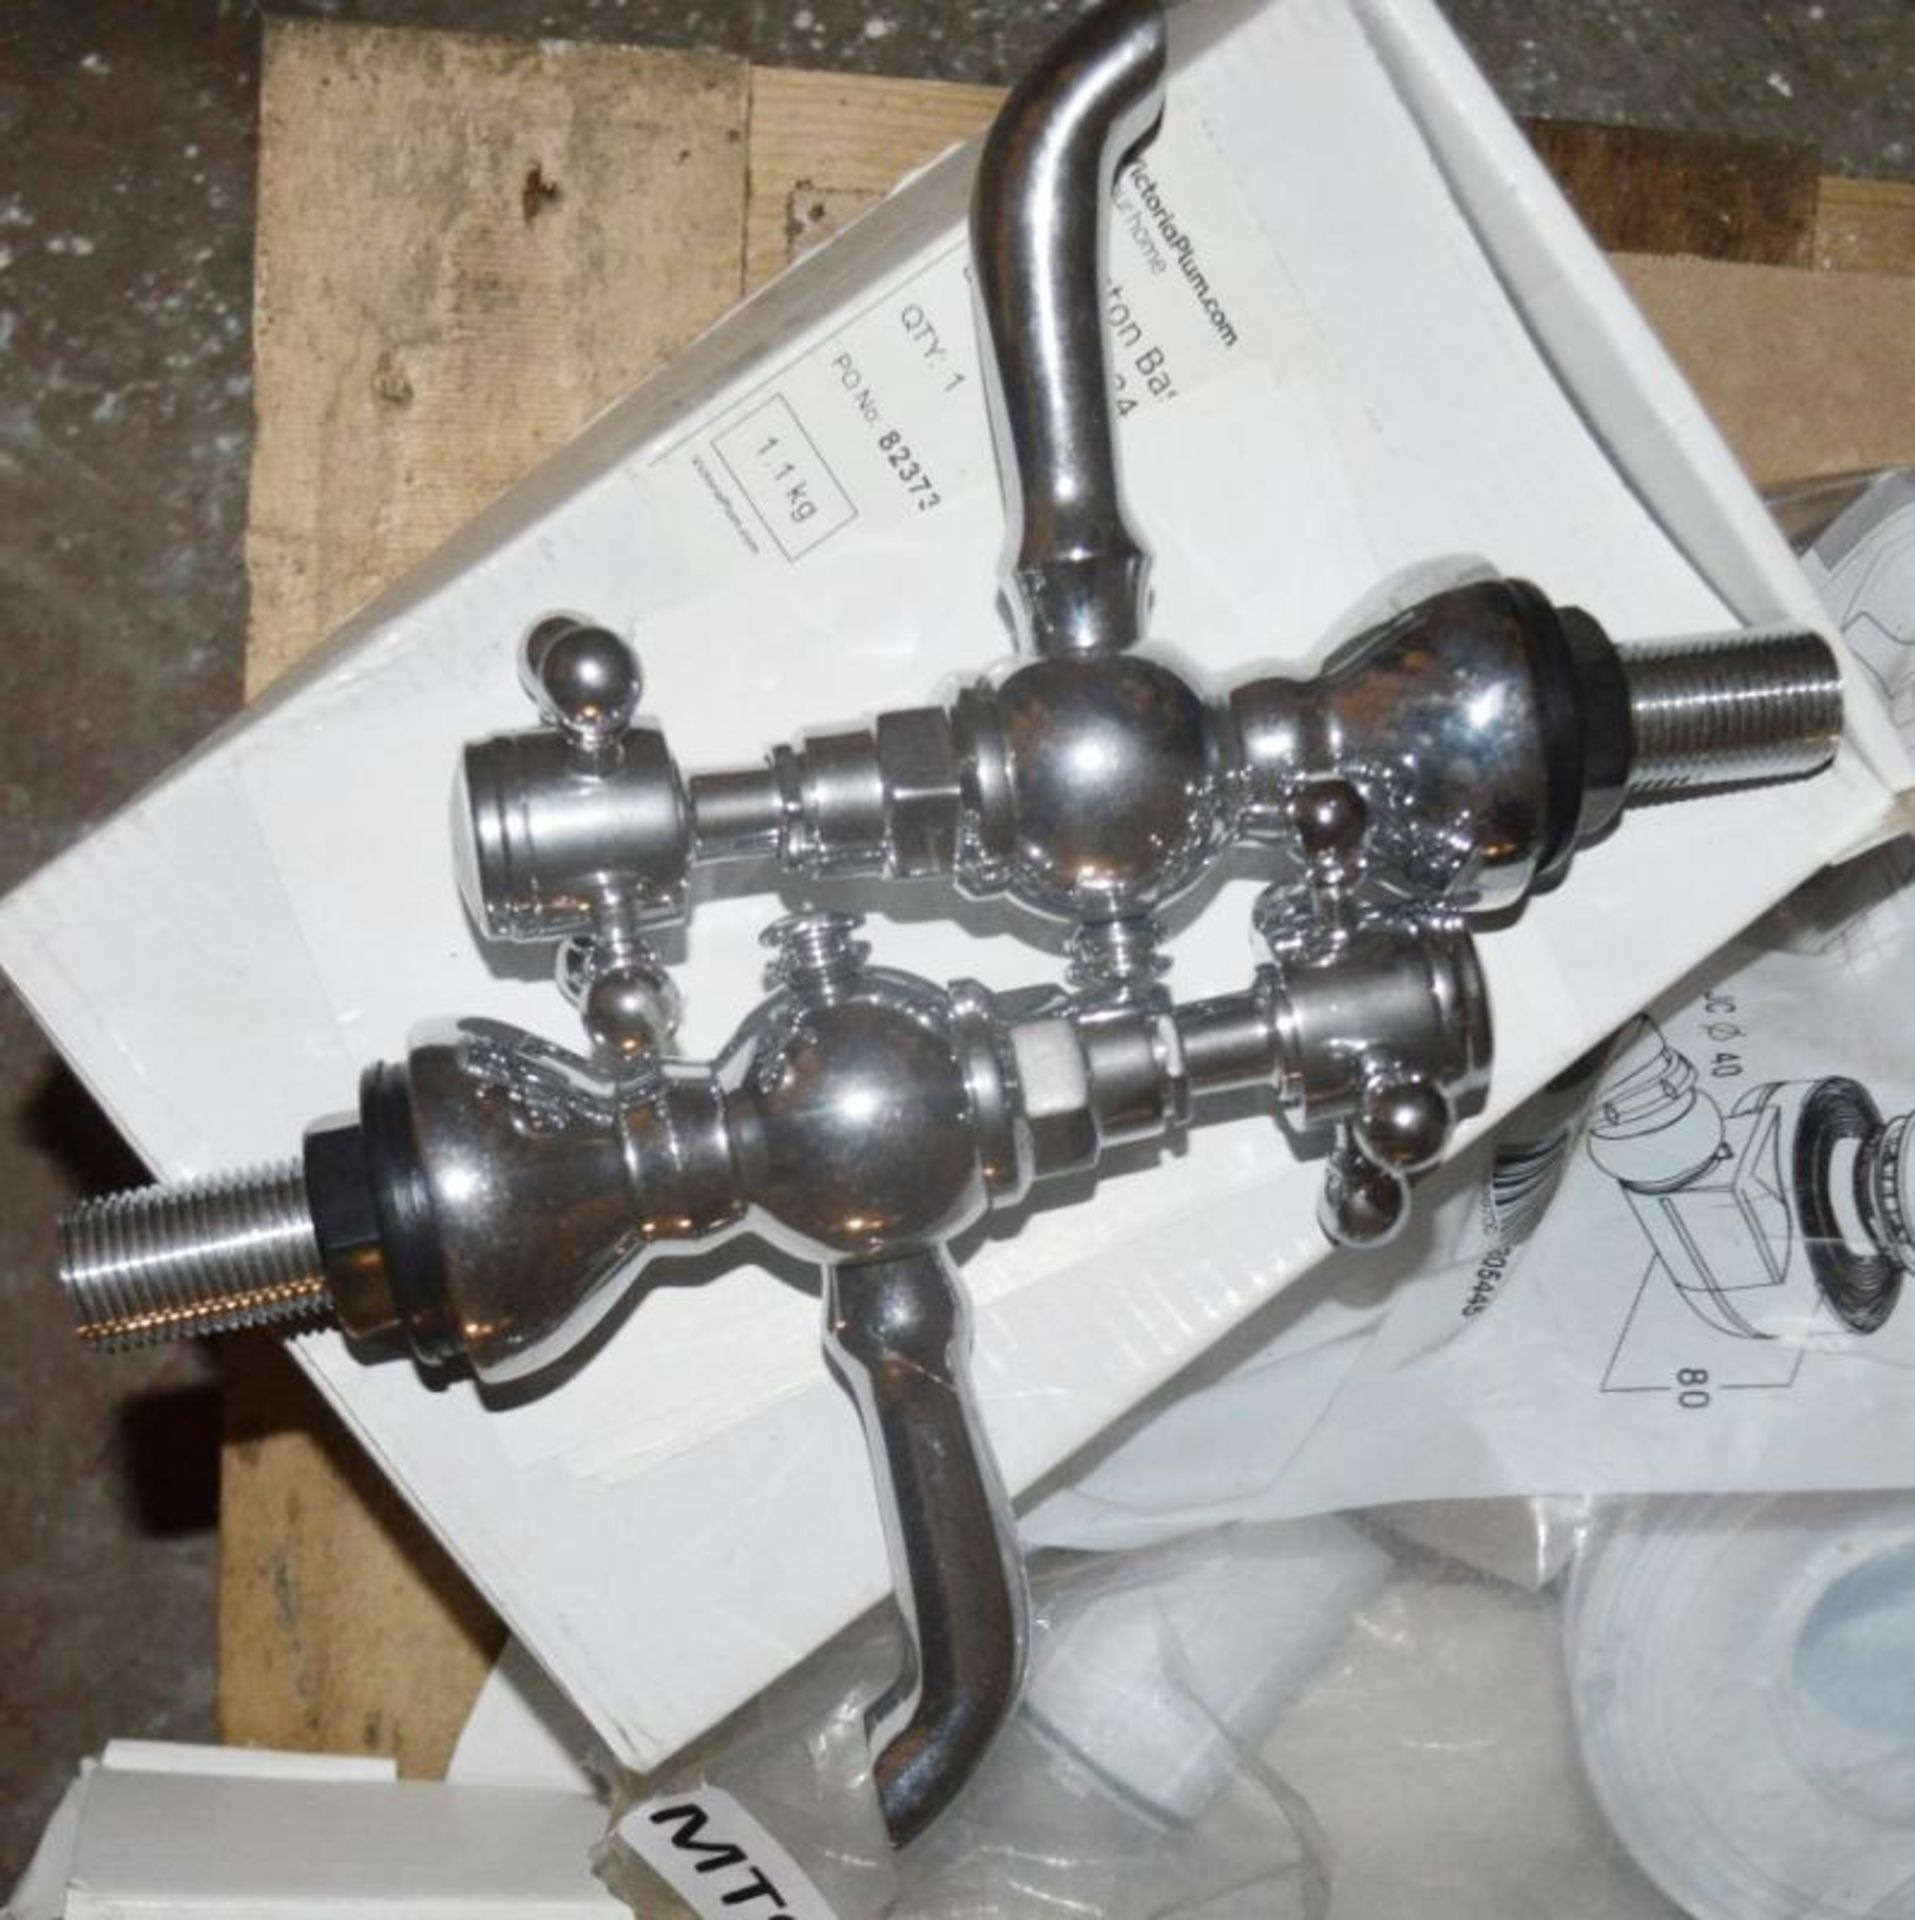 Approx 15 x Assorted Items Of Bathroom Brassware And Accessories - Brand New Boxed Stock - CL269 - L - Image 7 of 11